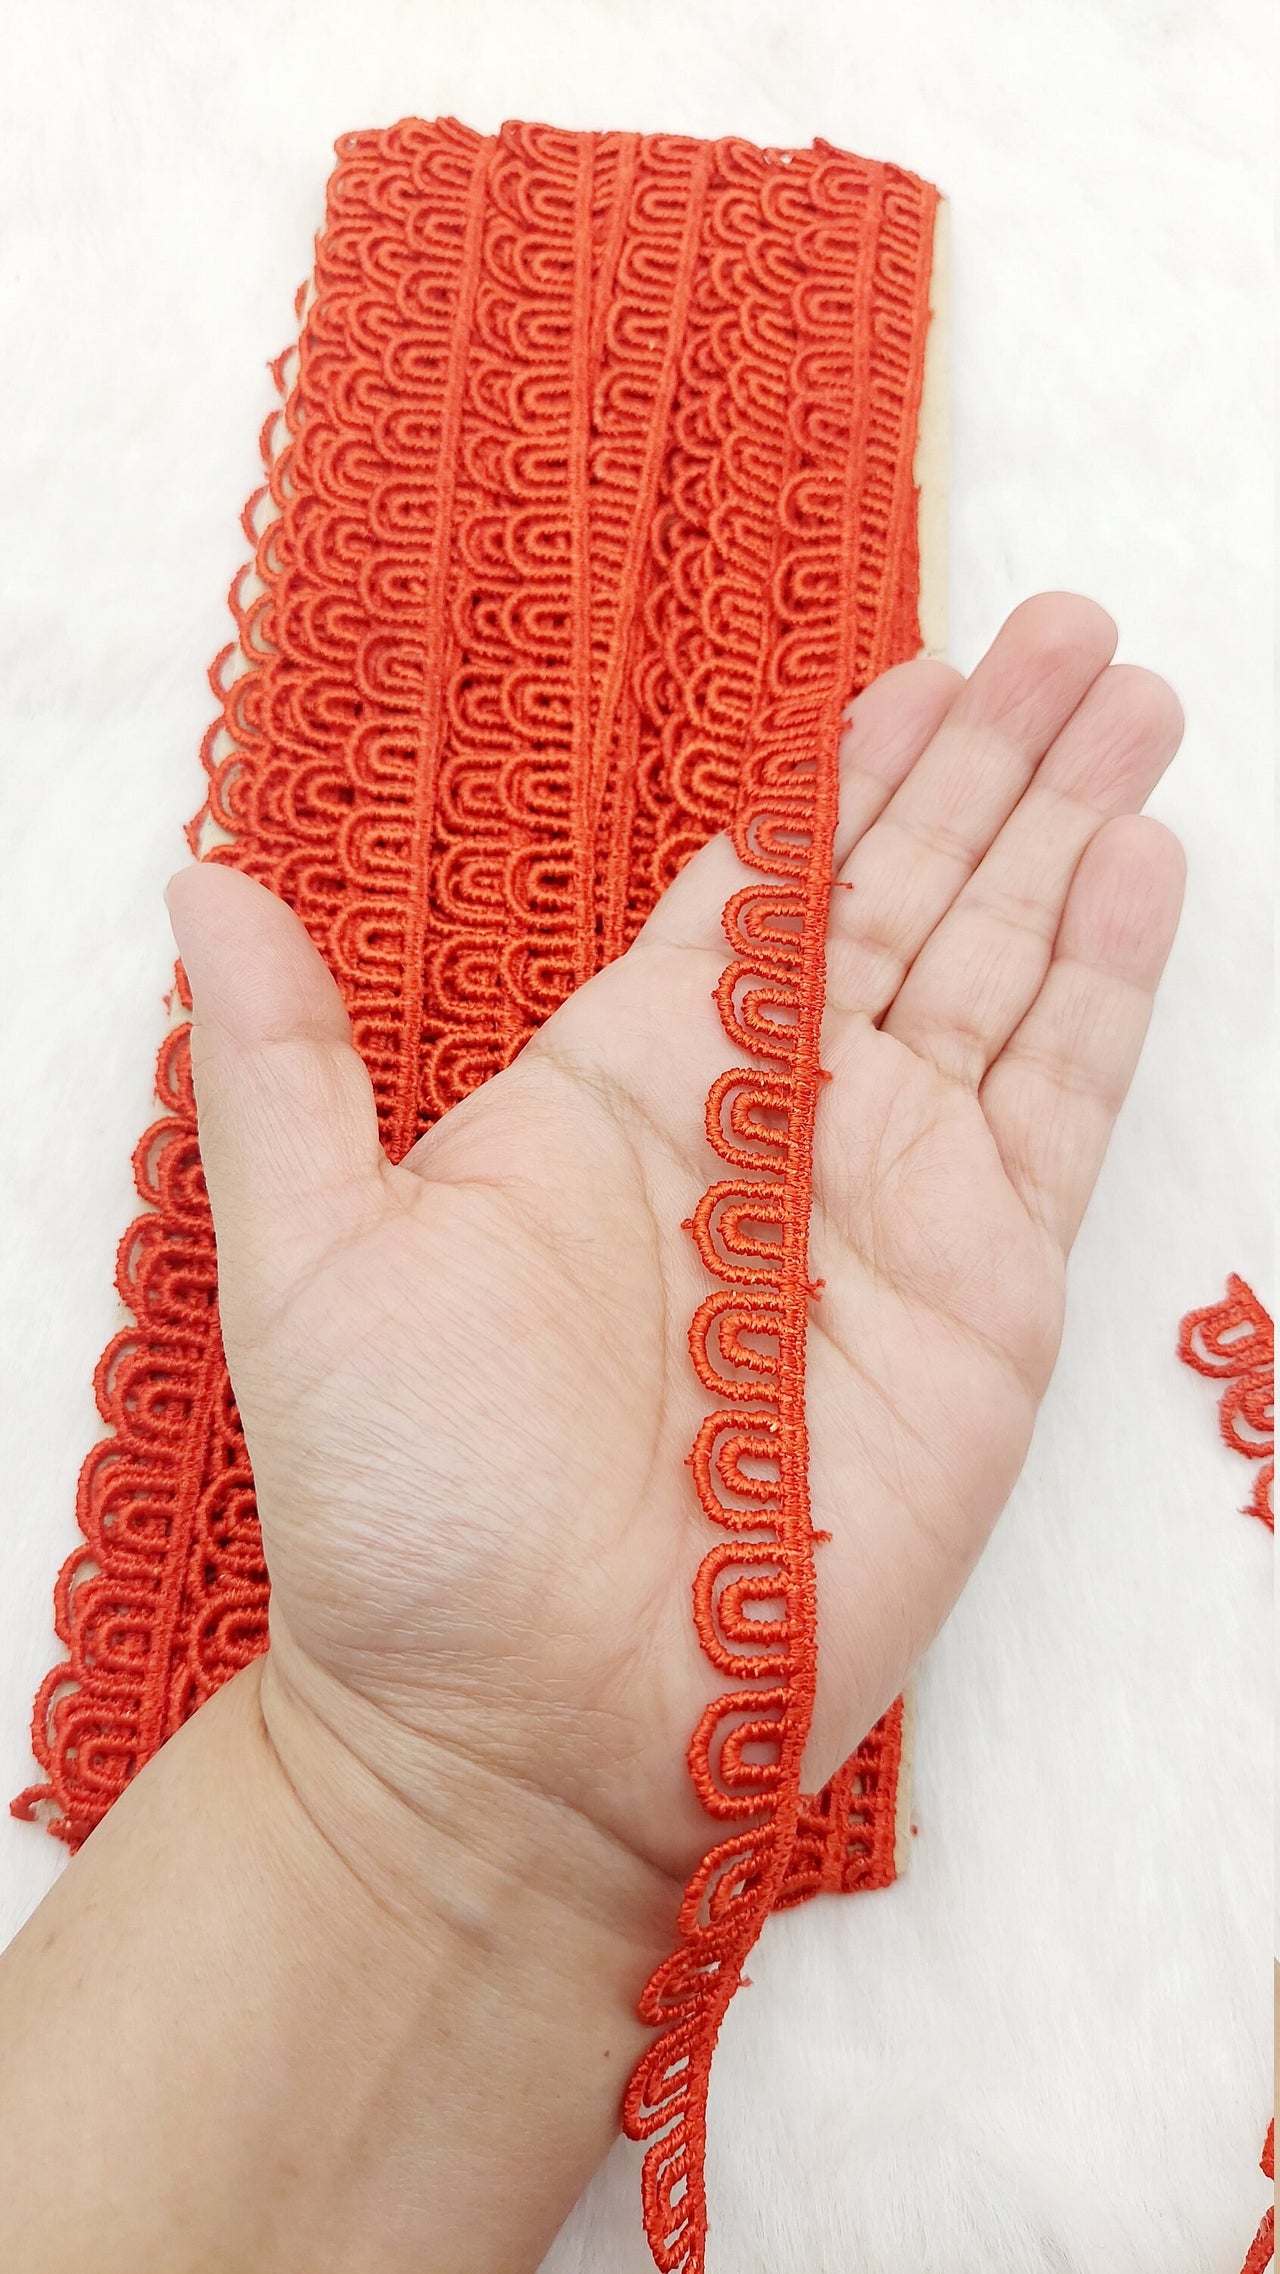 3 Yards Embroidery Cotton Lace Trim, Approx. 15mm Wide, Fringe Trim, Available in 10 colours